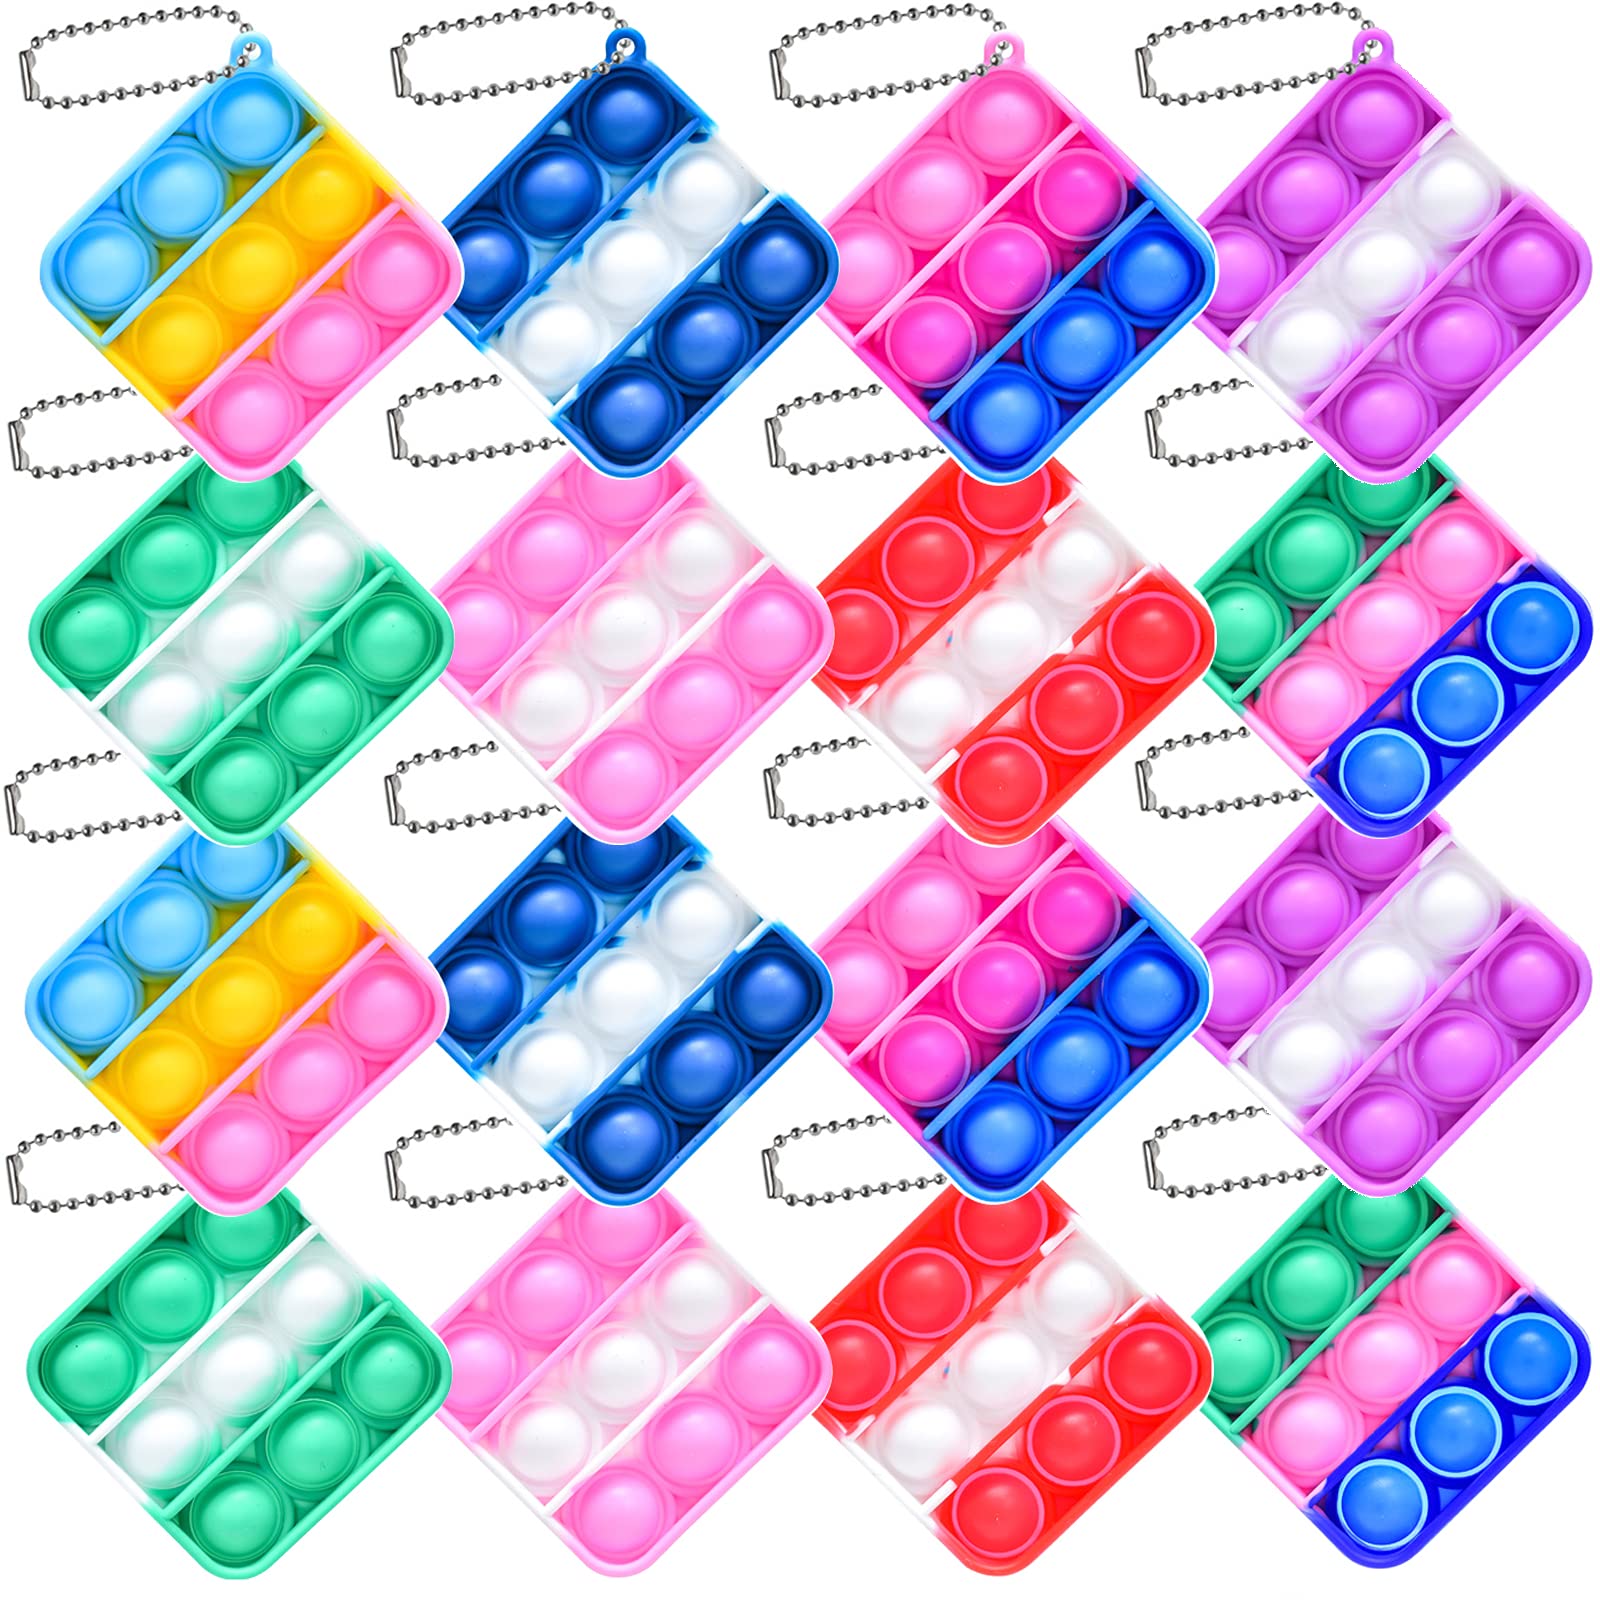 Zxhtwo 16 PCS Mini Pop Fidget Toy Pack Simple Bubble Poping Sensory Keychain Toys, Silicone Squeeze Rainbow Stress Relief Hand Toy, Anti-Anxiety Office Desk Toys for Kids Adults